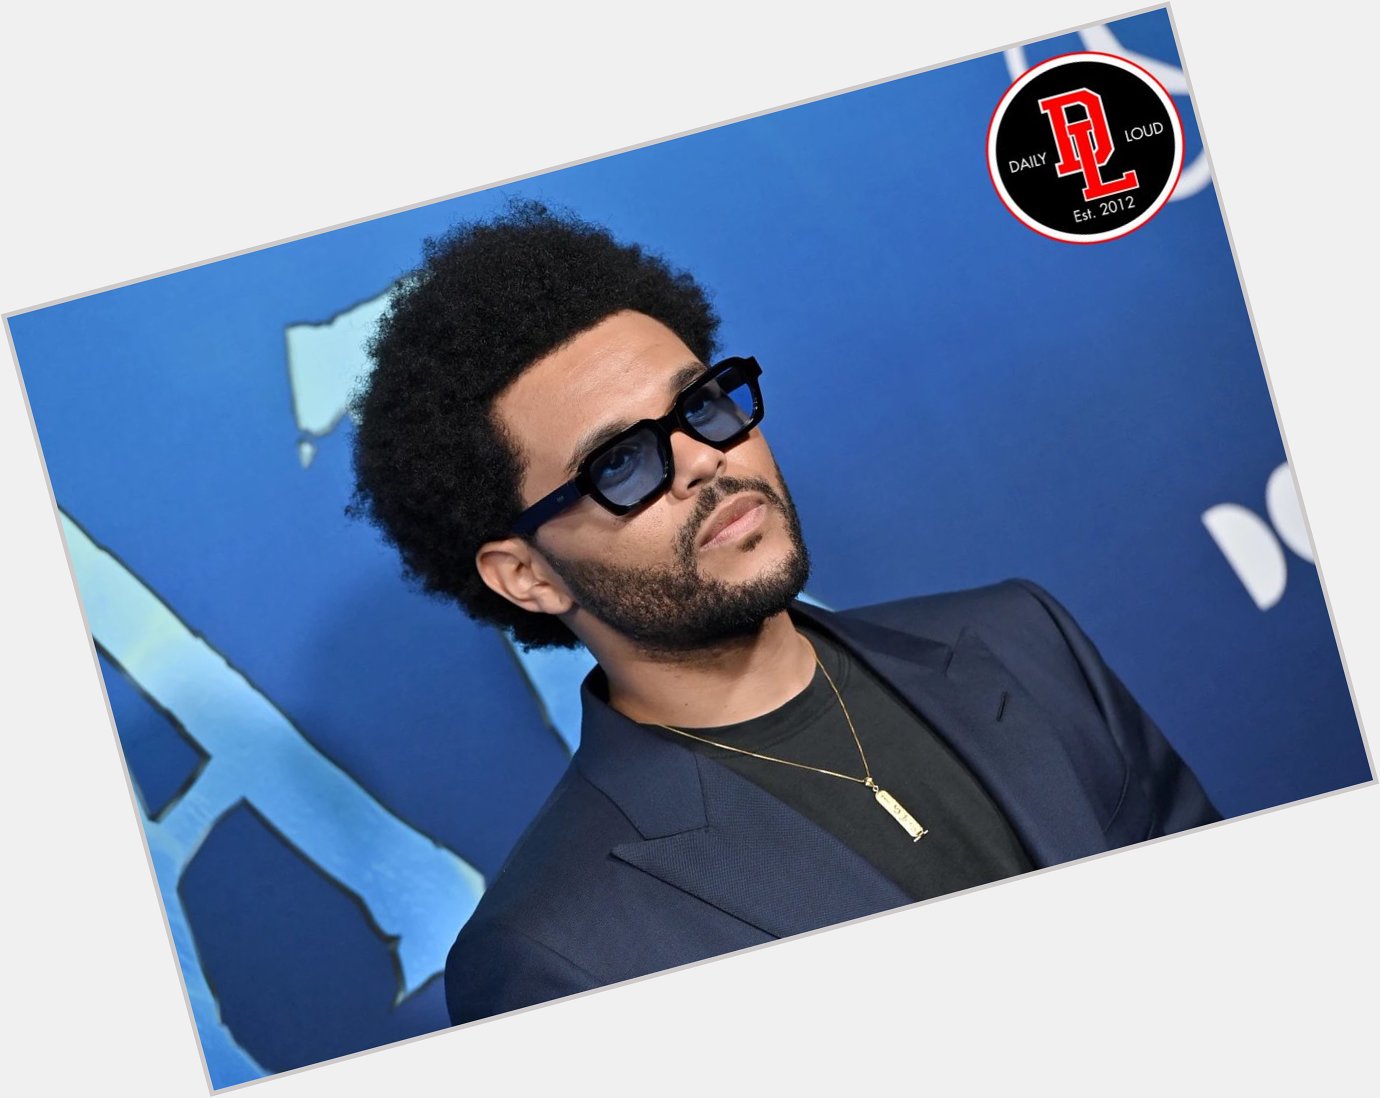 Happy Birthday to The Weeknd, today he turns 33 years old 